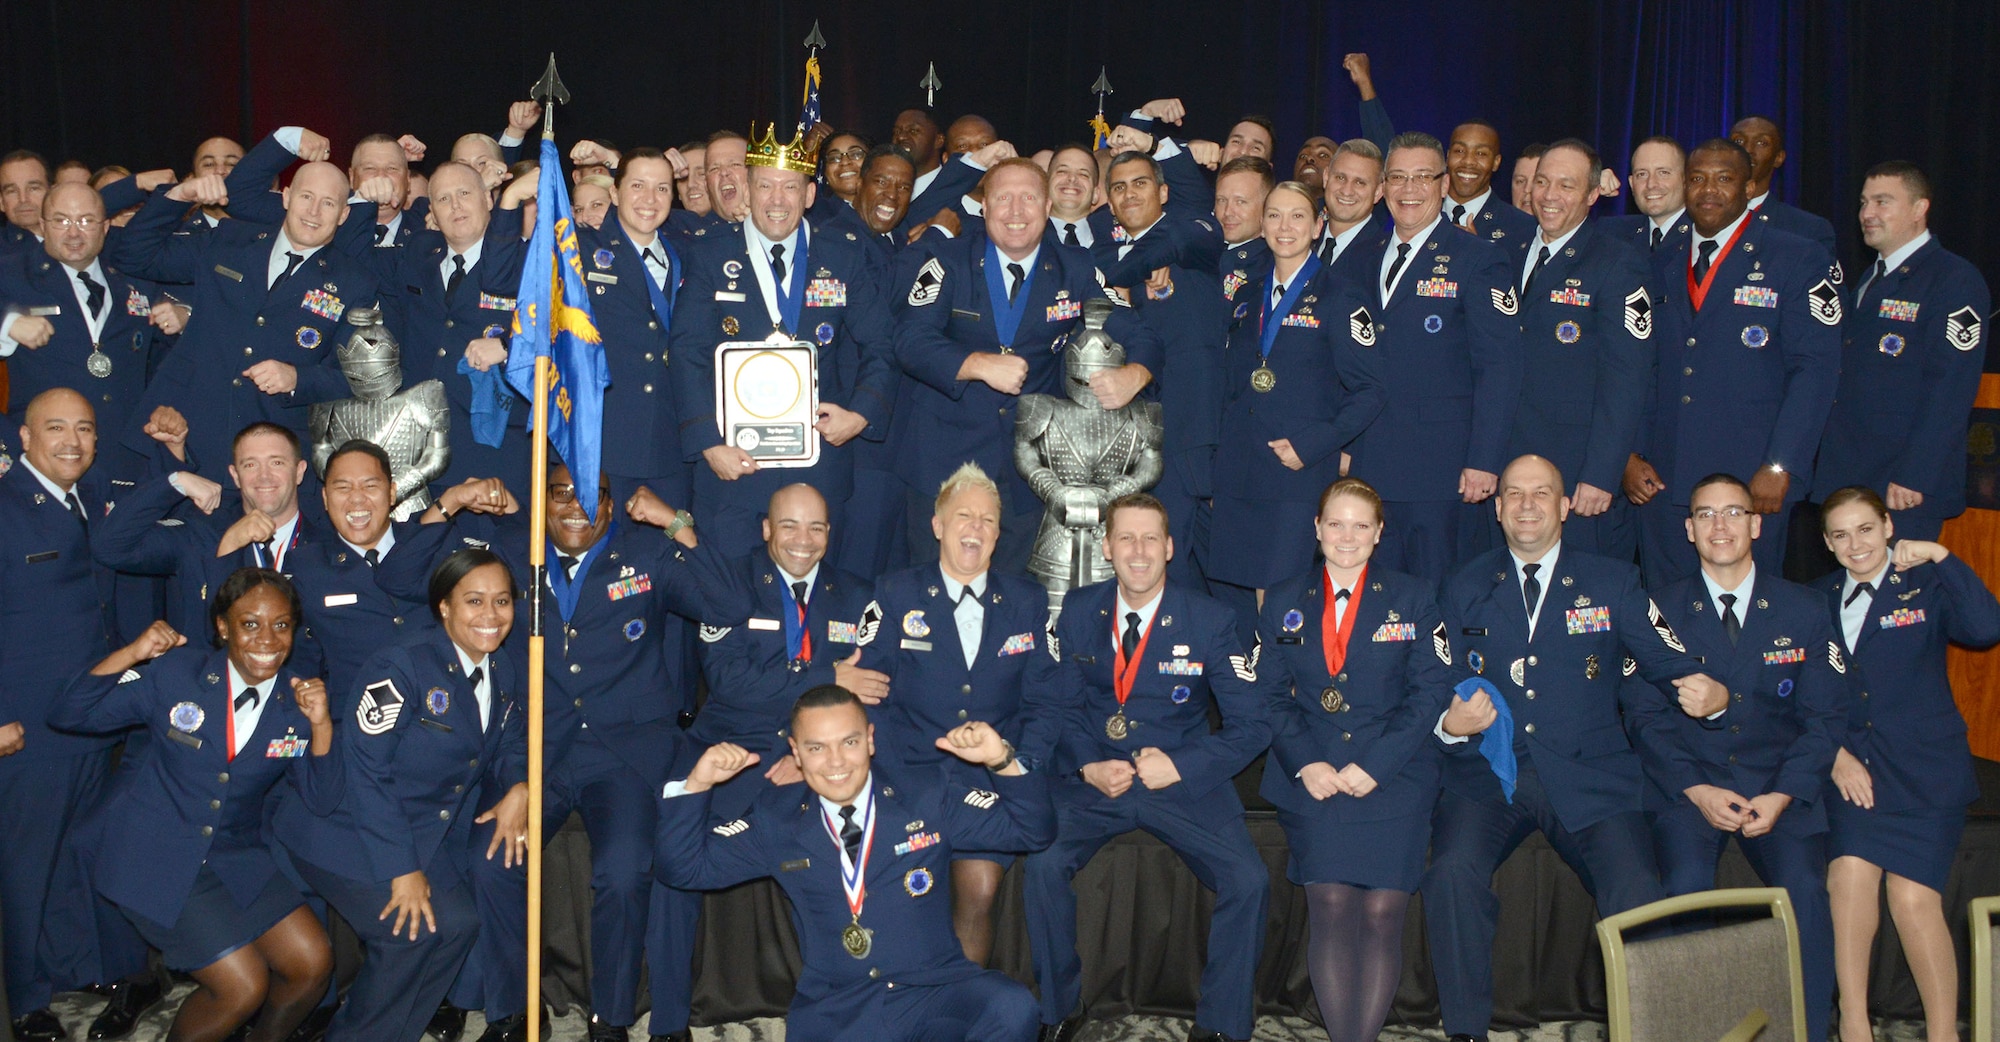 Air Force Reserve Command Recruiting Service's Northern Recruiting Squadron celebrate winning the top squadron for fiscal year 2019 at their annual awards. AFRC Recruiting Service is now a classic associate group, the 367th Recruiting Group, within Air Force Recruiting Service as part of Total Force recruiting. (Air Force photo/Master Sgt. Chance Babin)